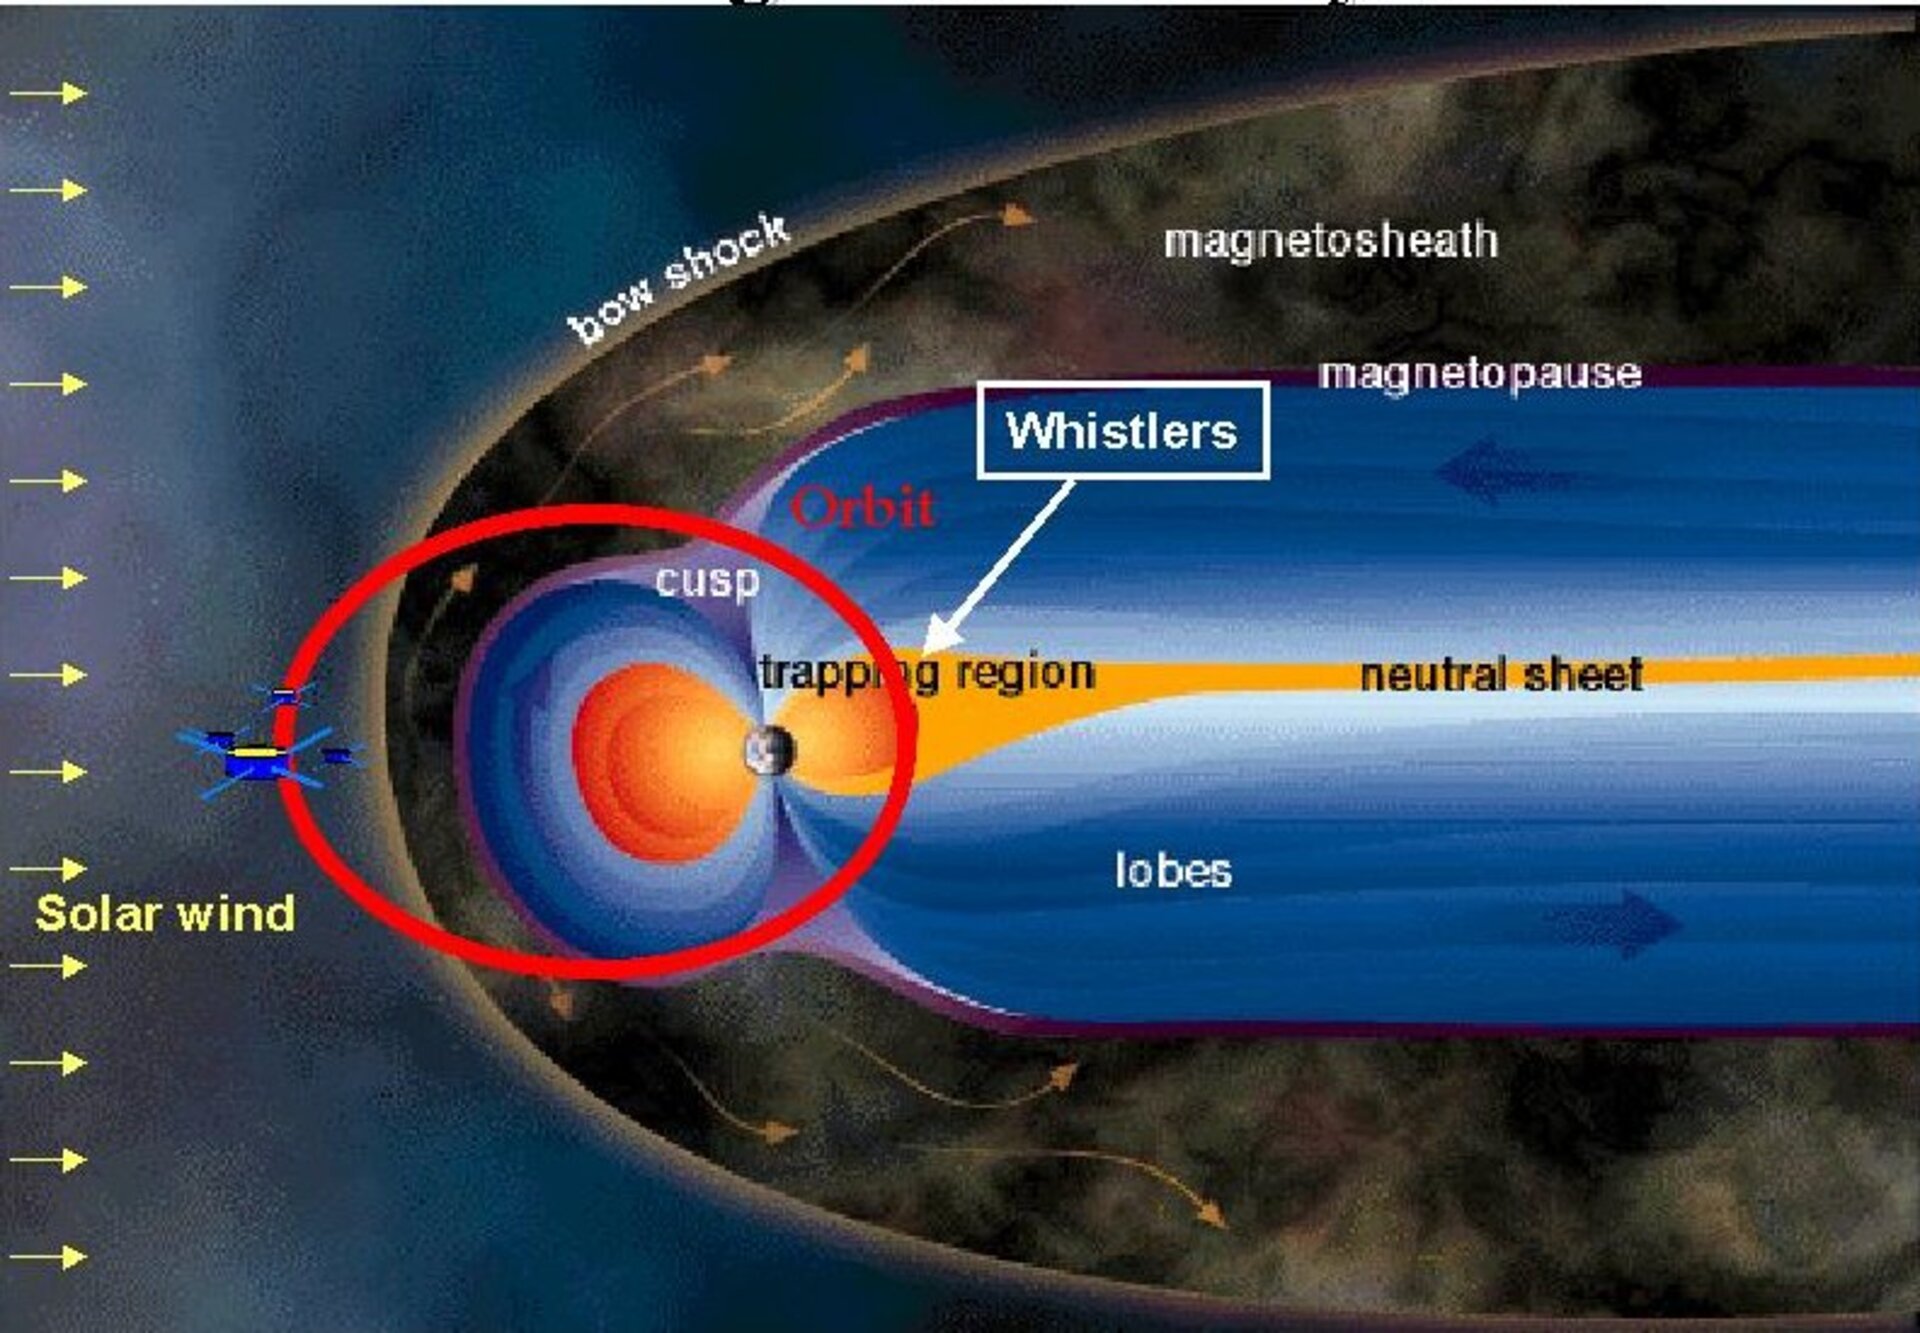 Region of the Earth's magnetosphere were Cluster encountered the "Whistler"